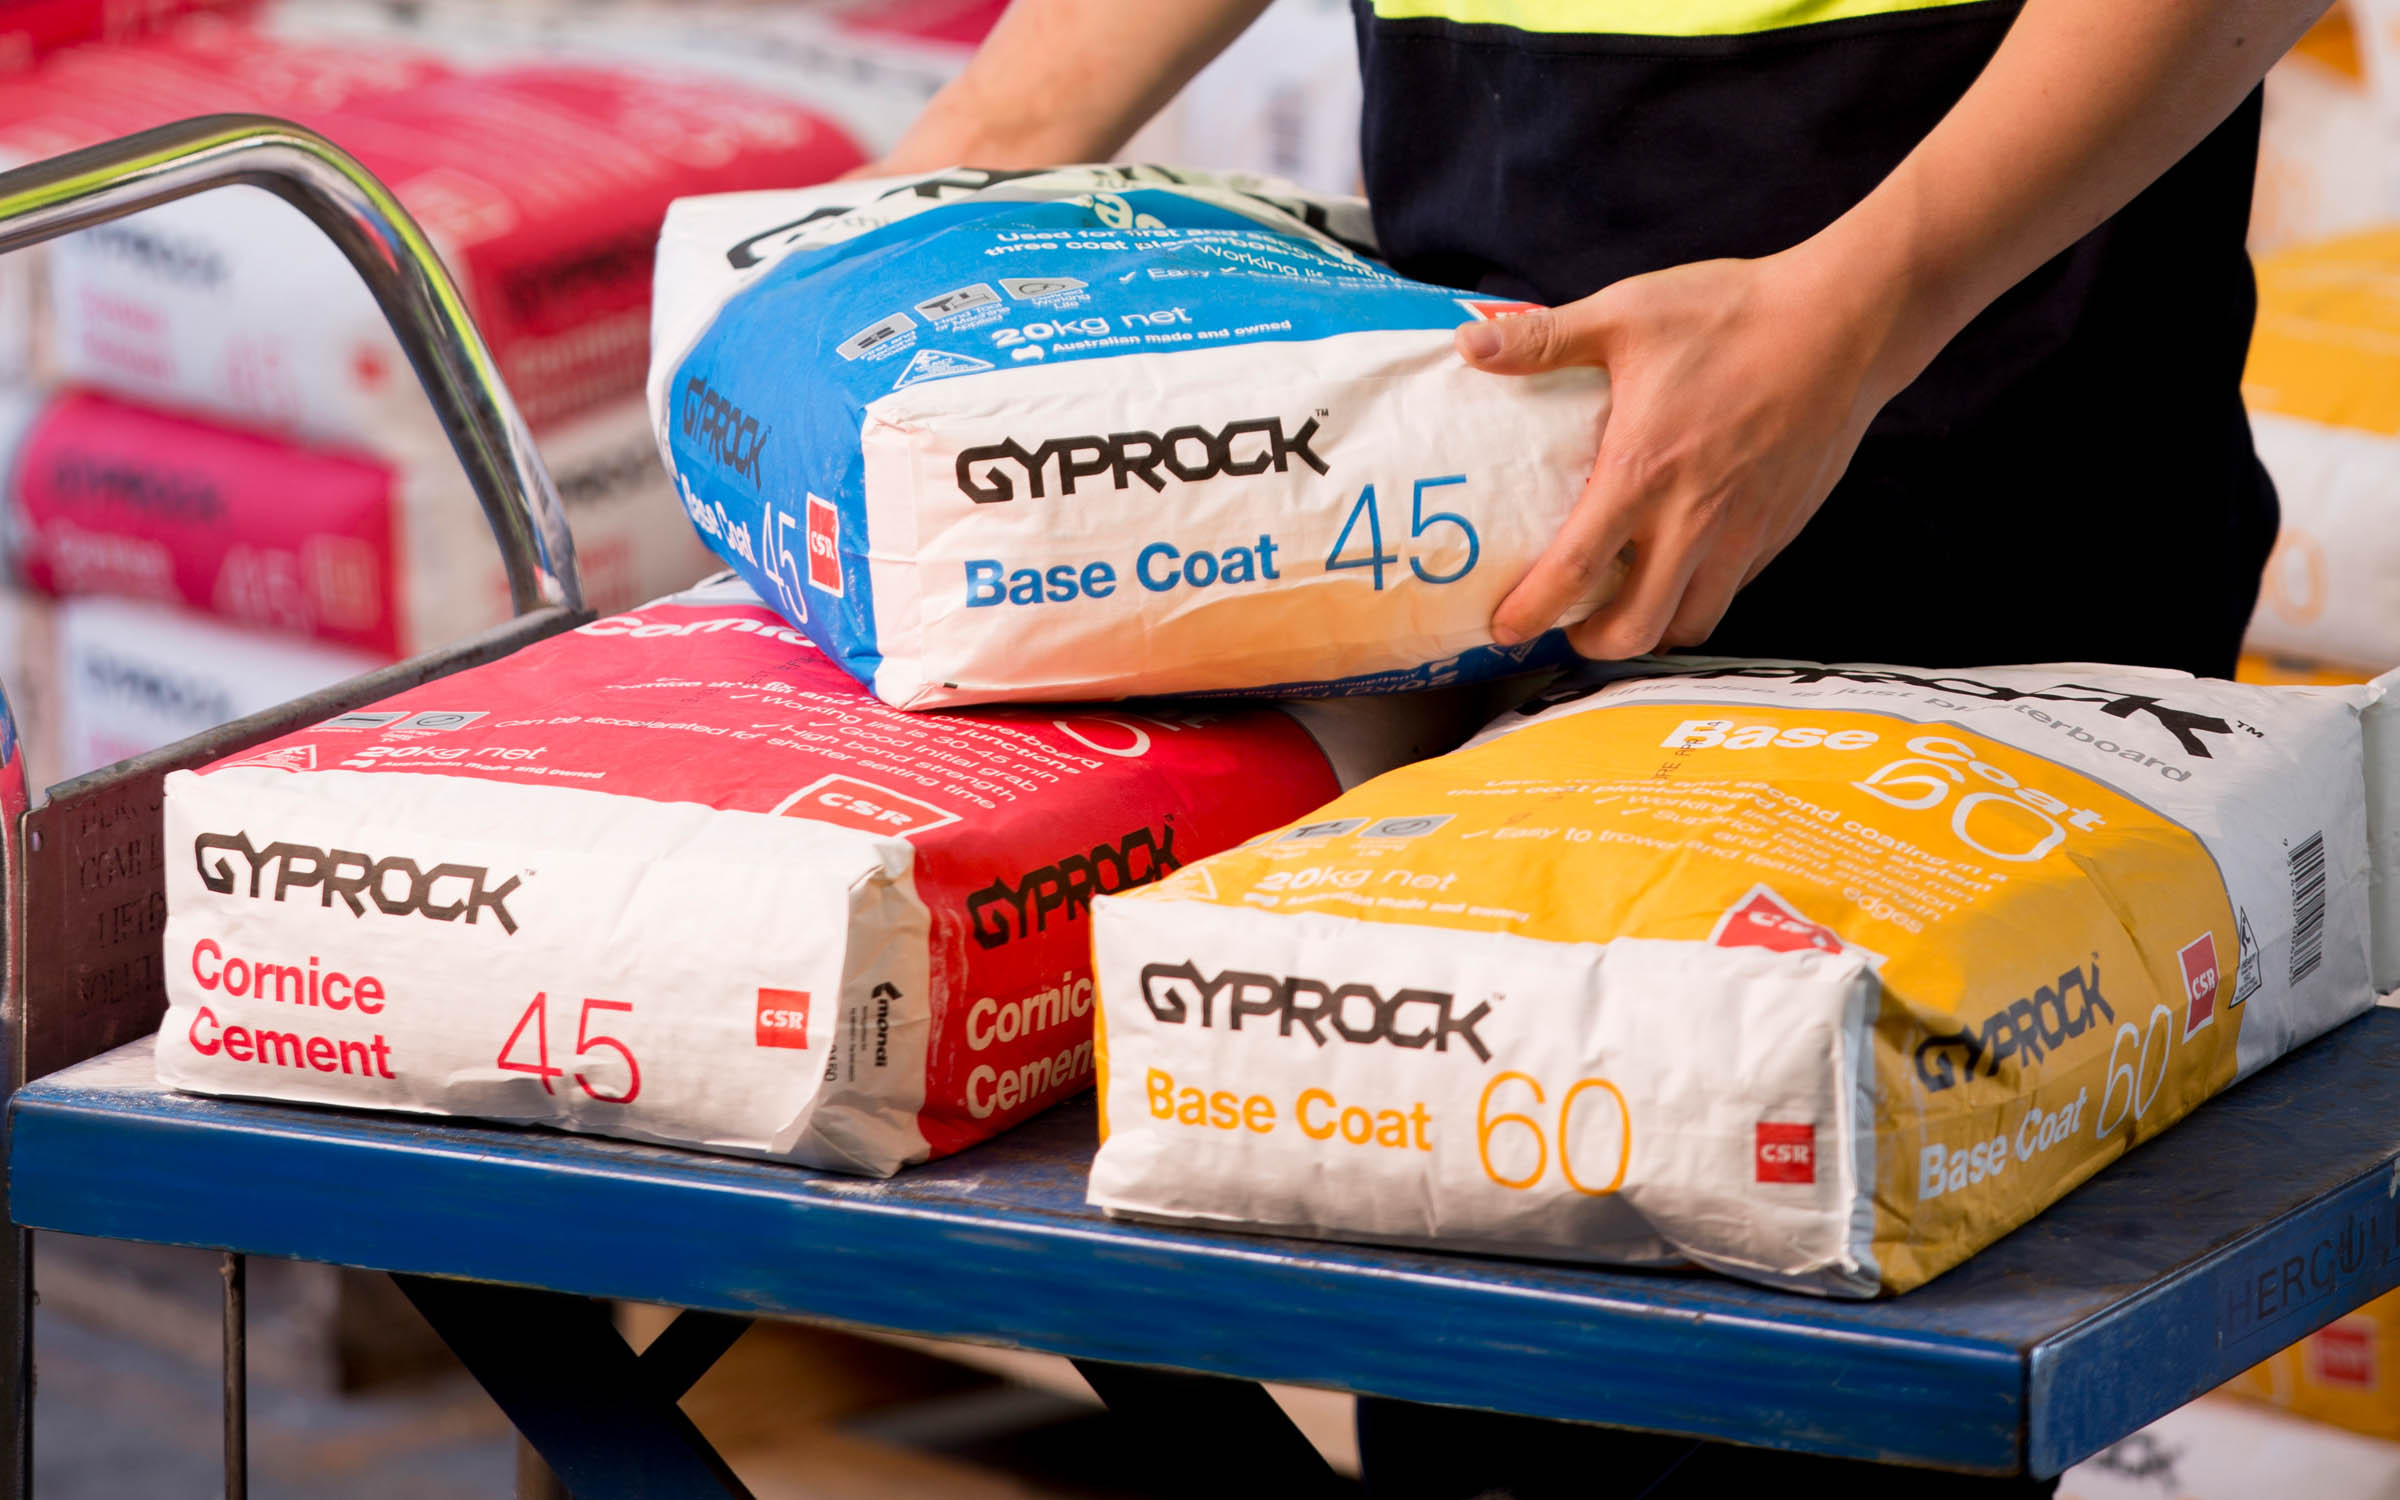 Gyprock worker holding a Base Coat bag over two other Gyprock products